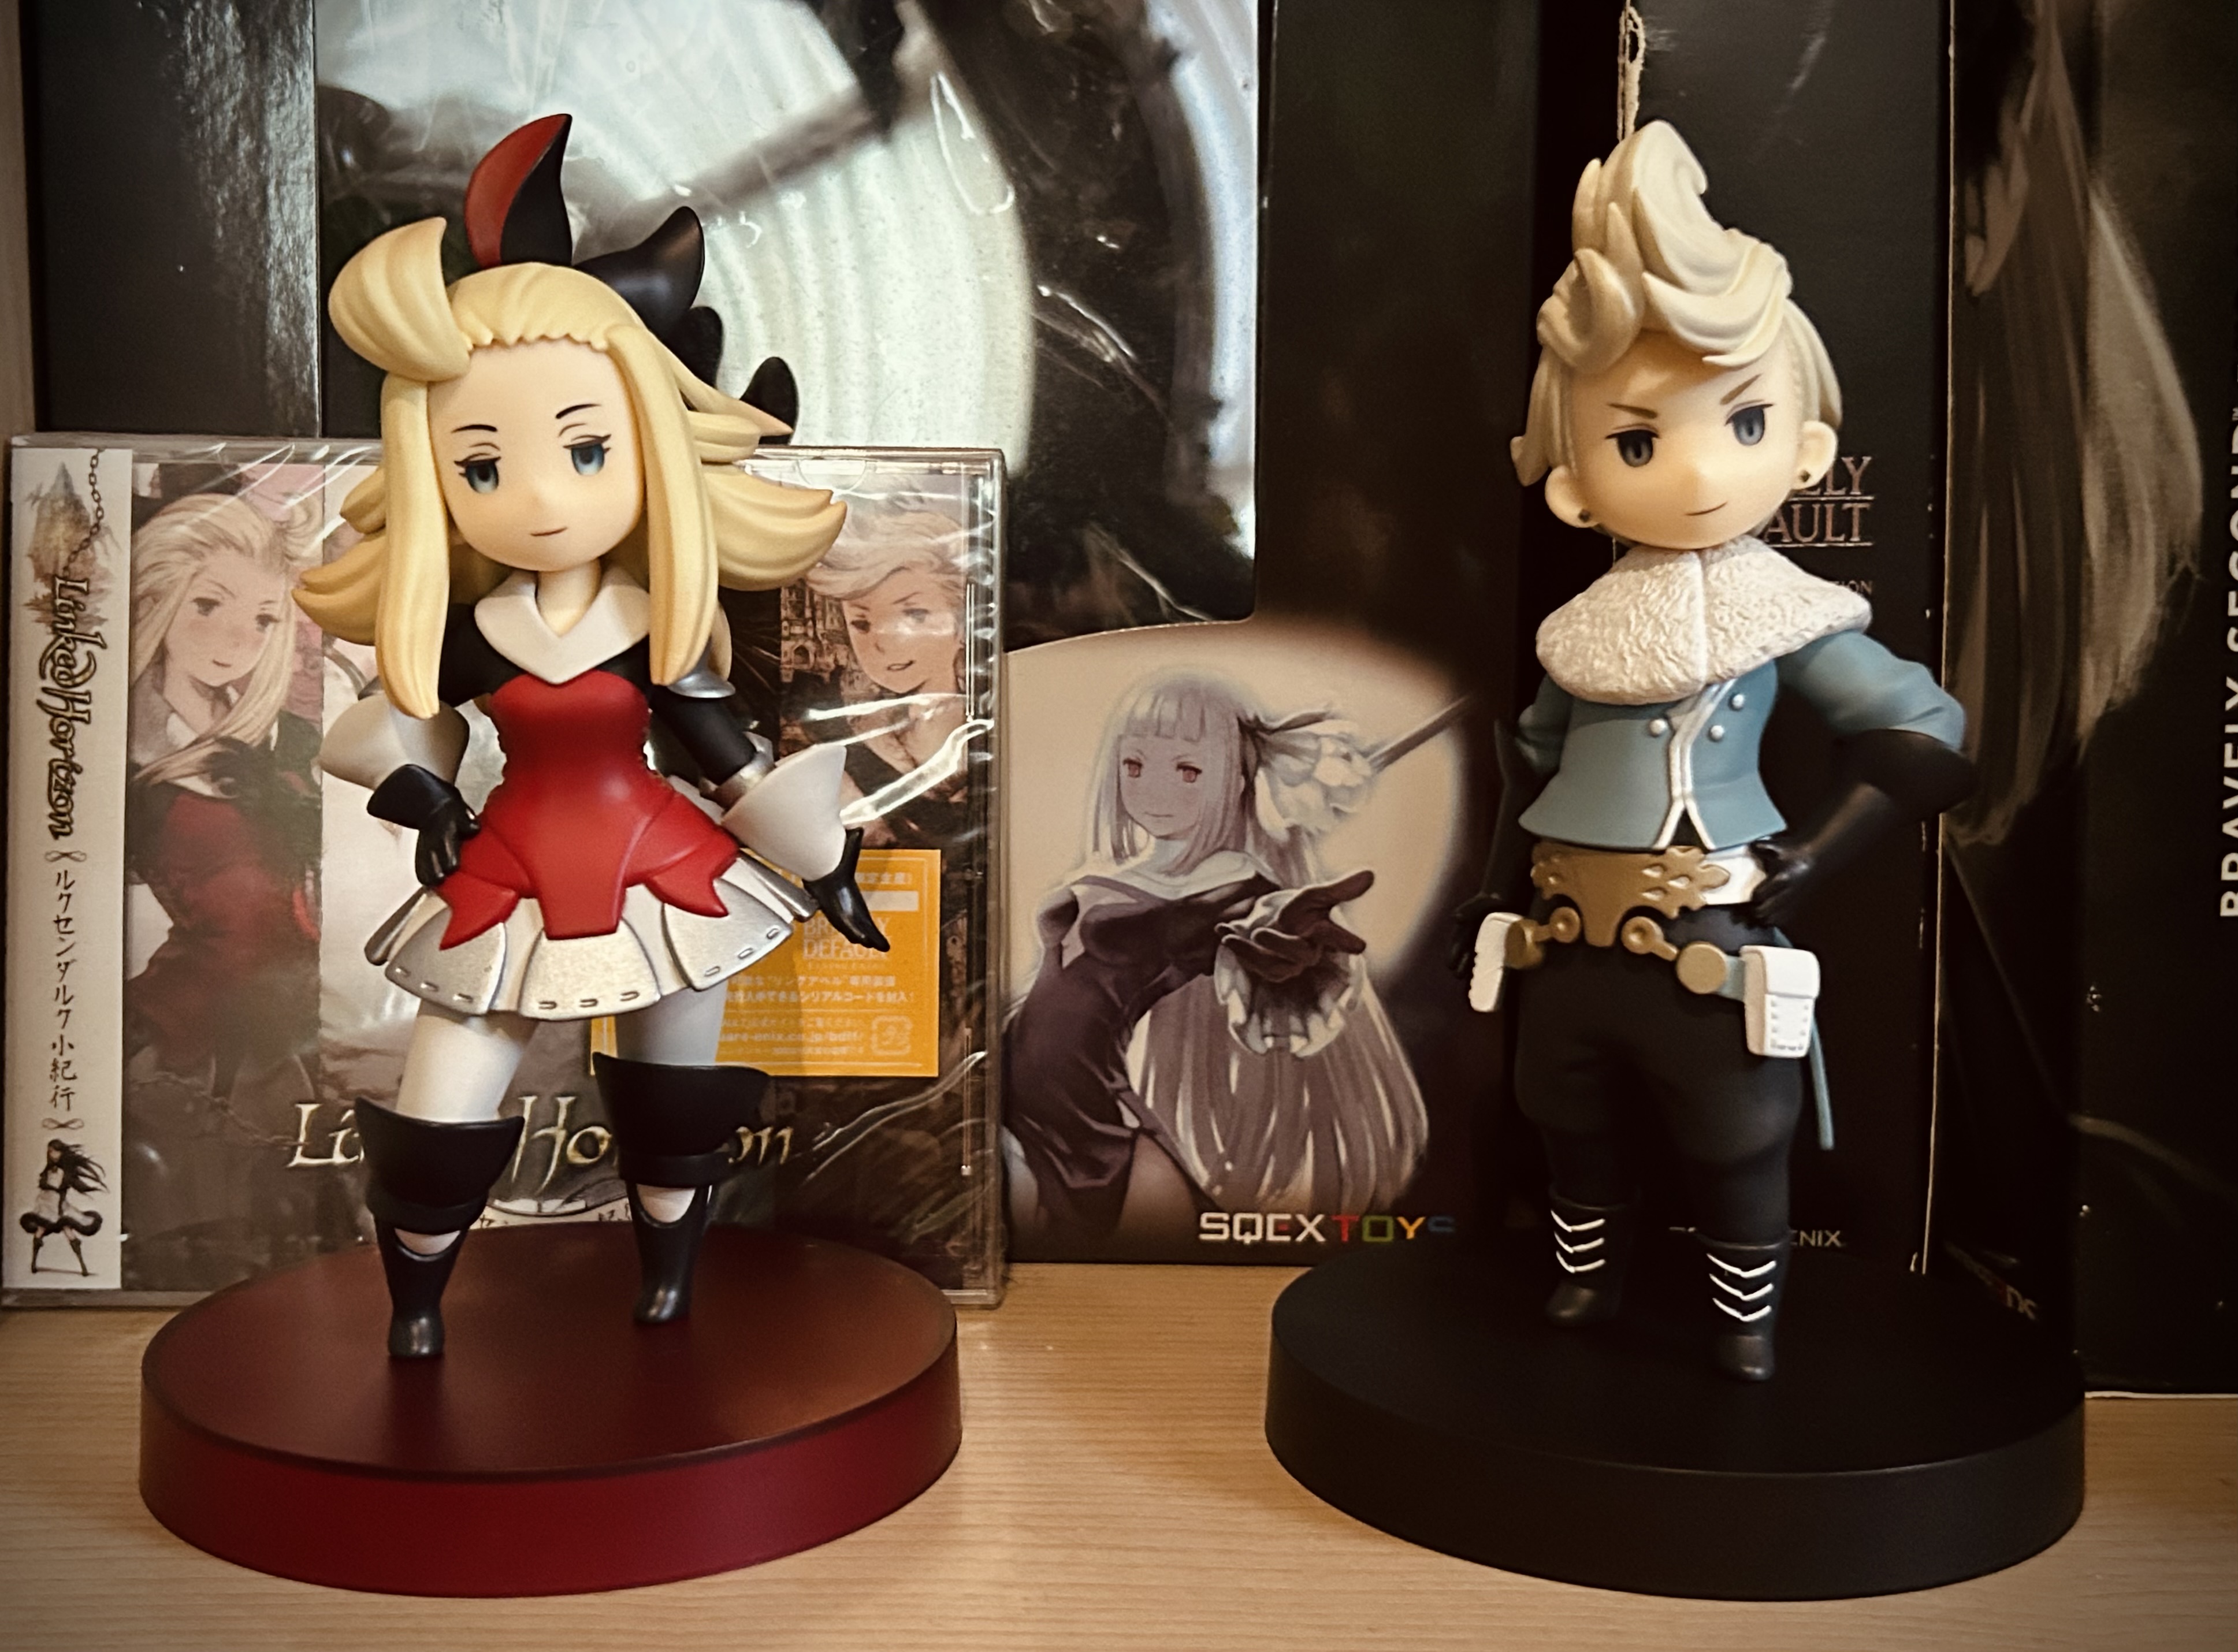 GoodSmile_US on X: SQUARE ENIX presents a POP UP PARADE figure of